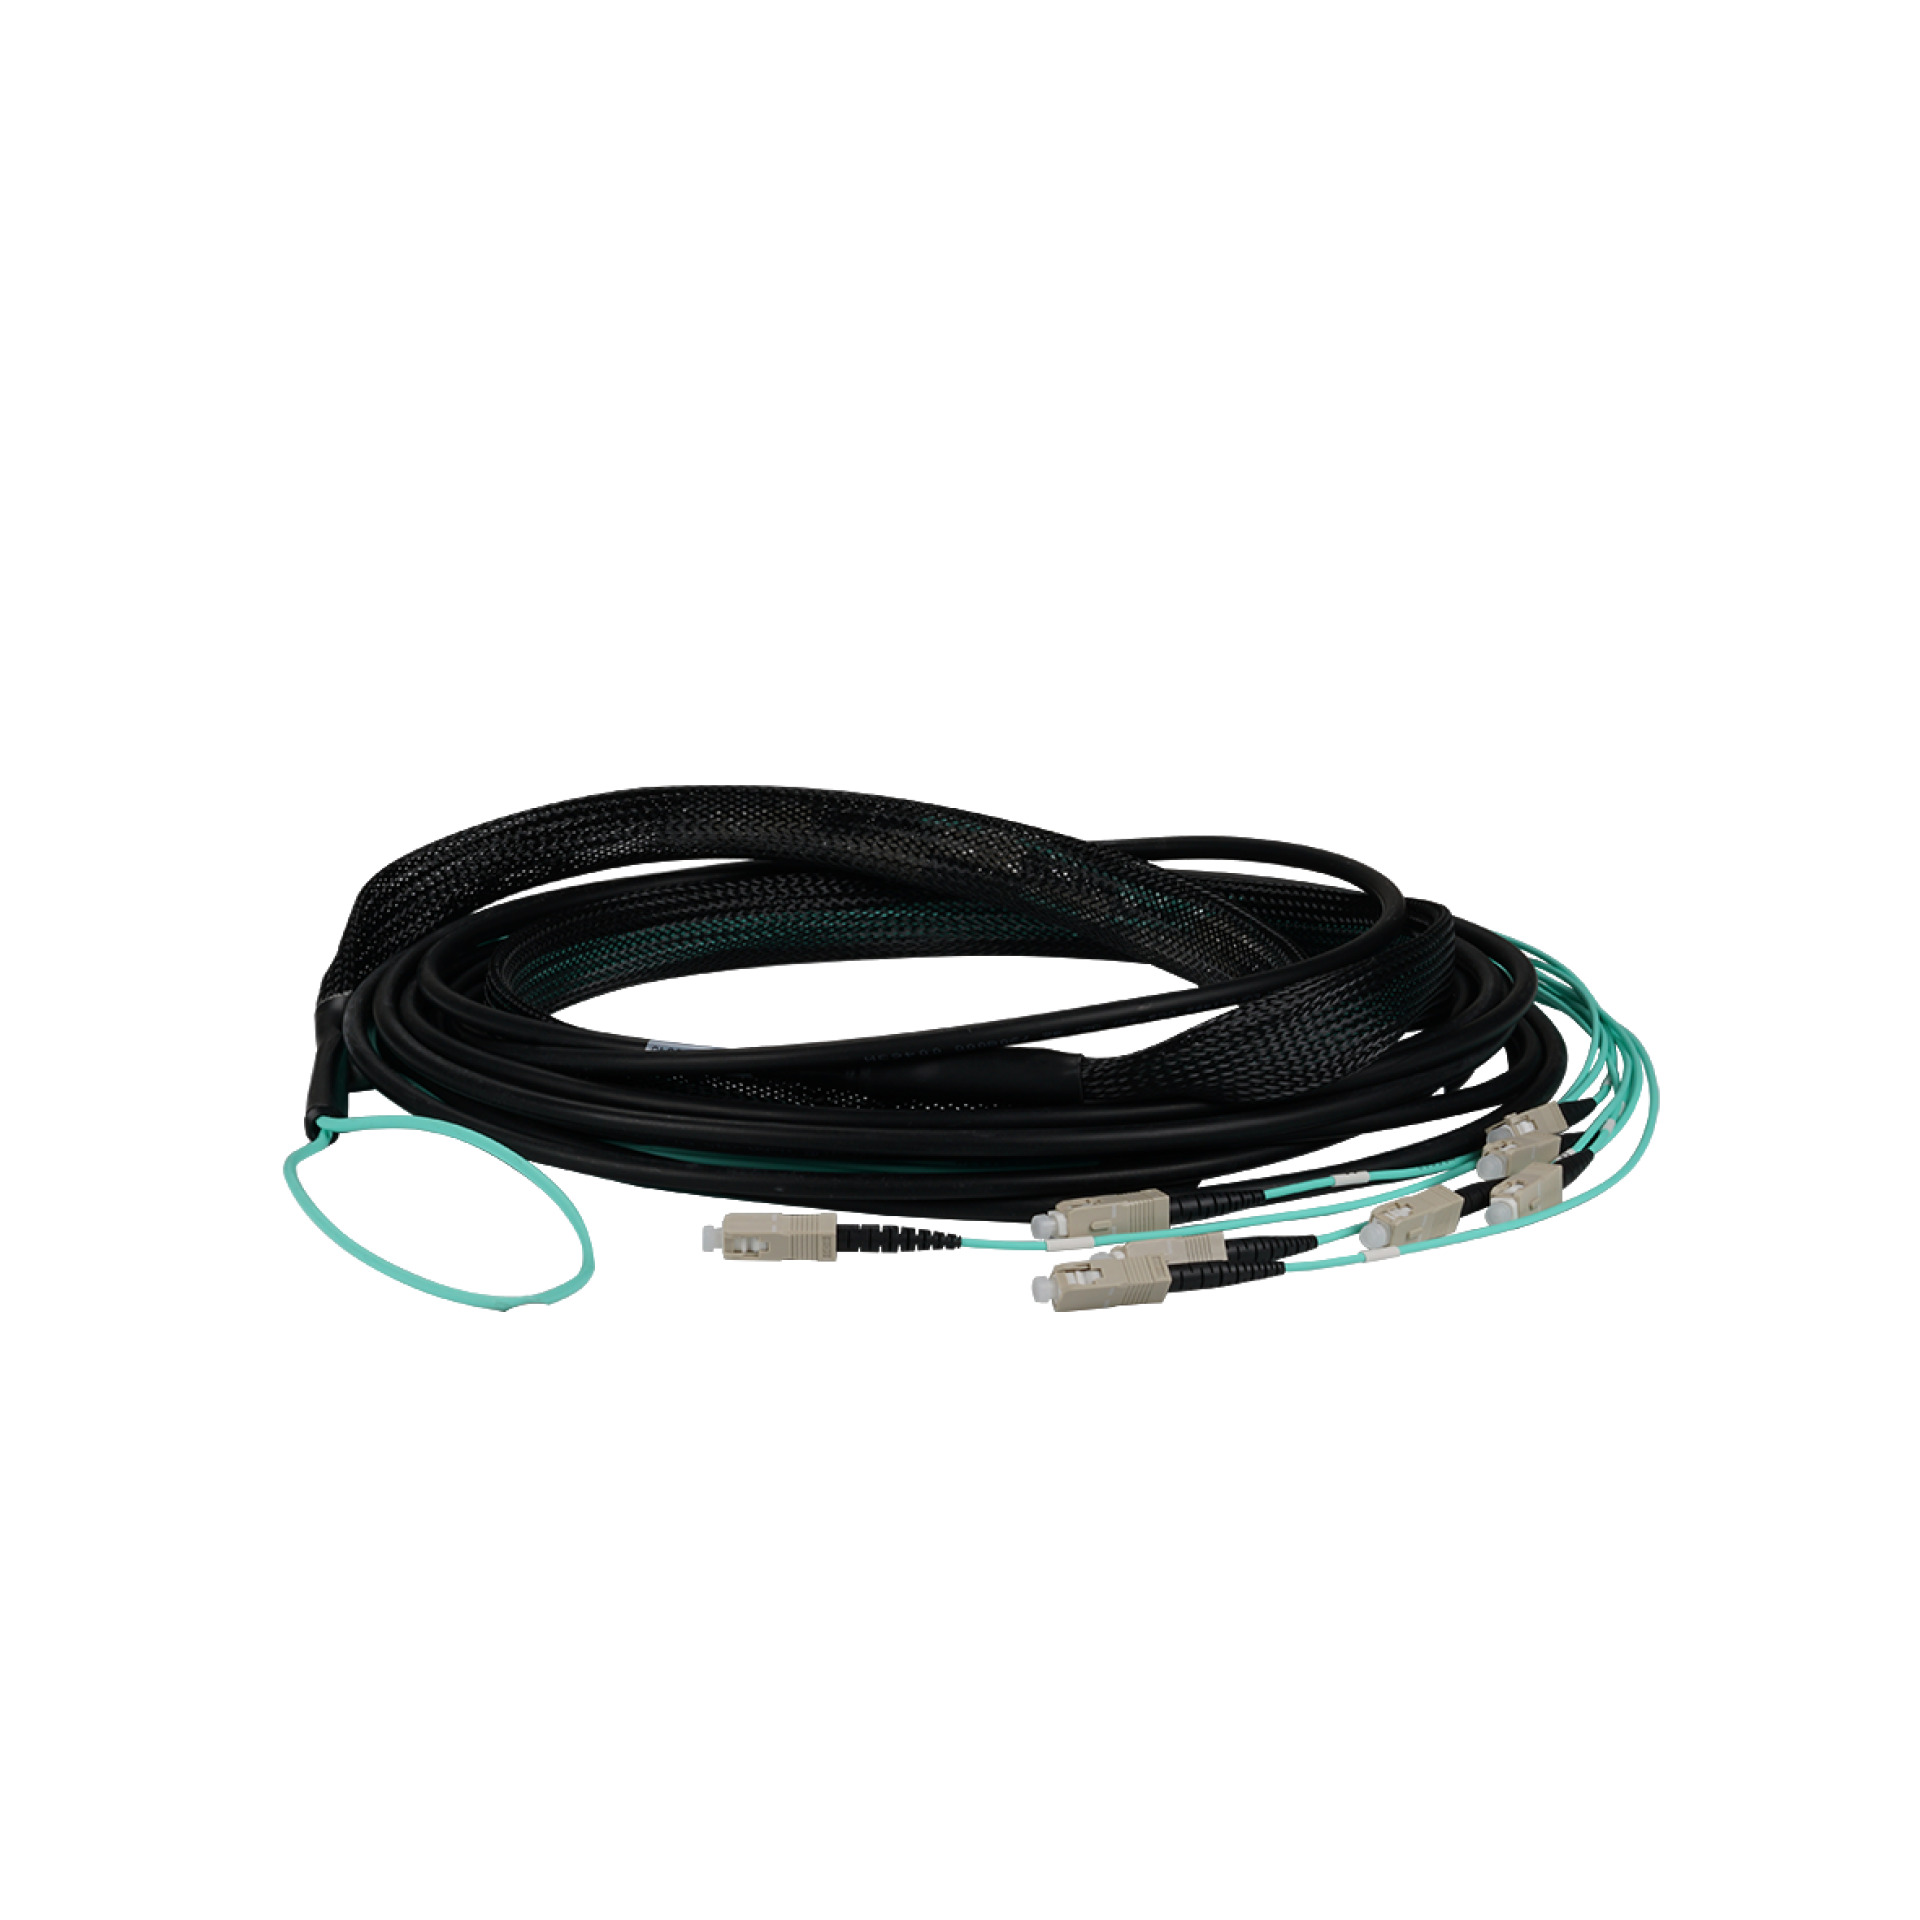 Trunk cable U-DQ(ZN)BH 4G 50/125, SC/SC OM3 180m